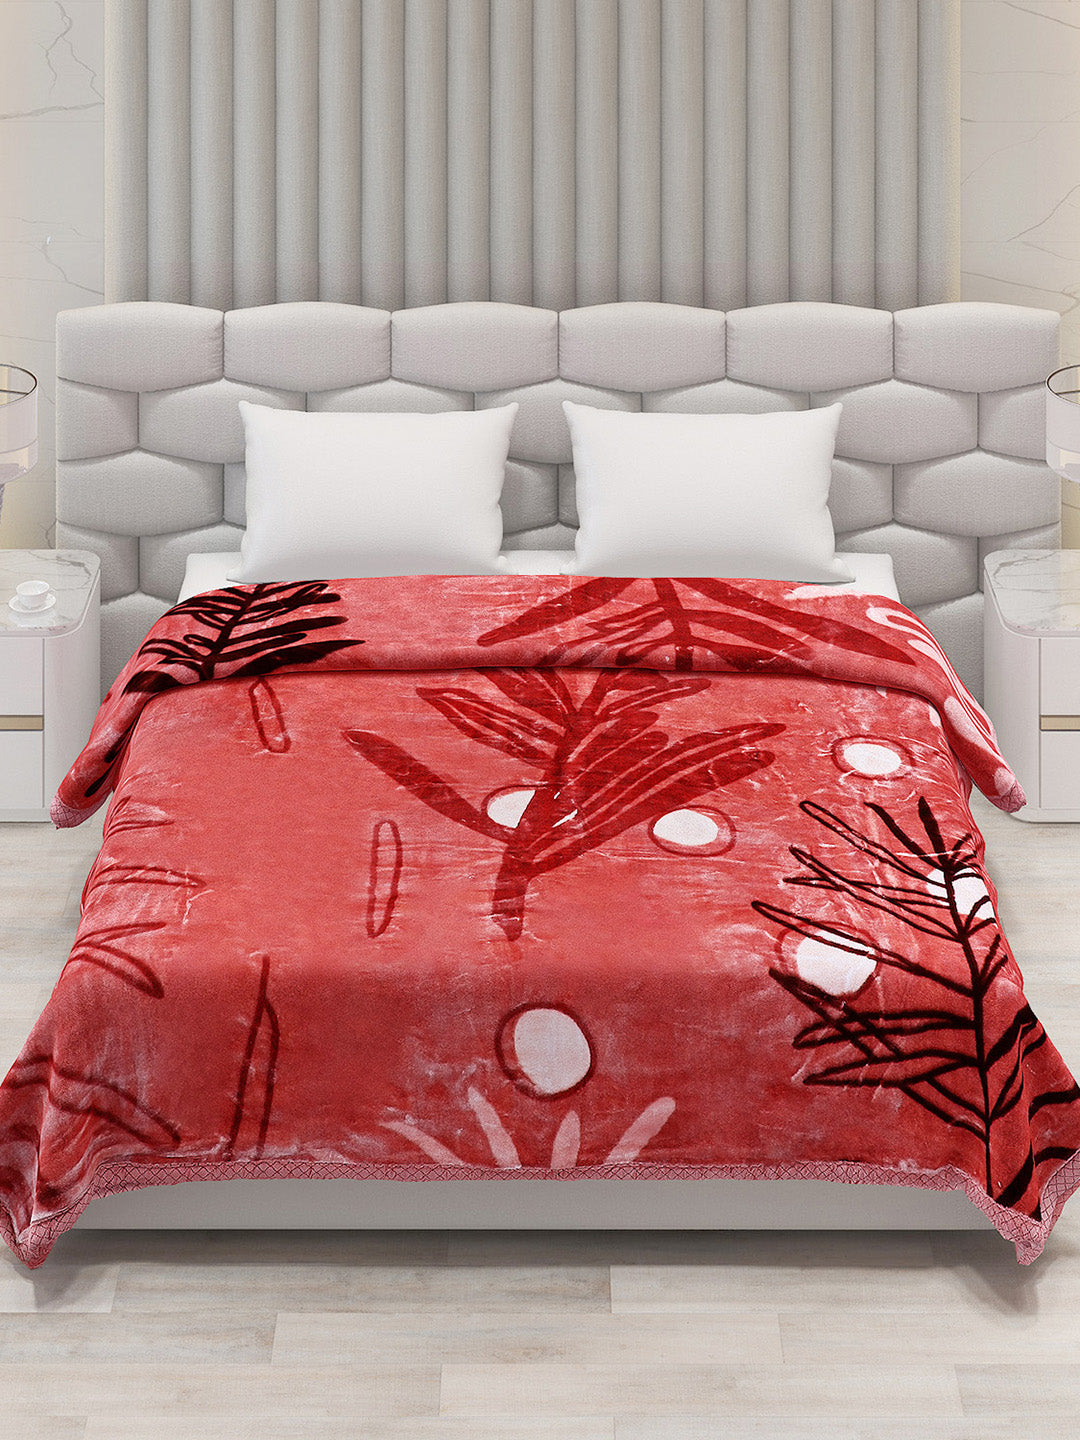 Printed Double Bed Blanket for Heavy Winter -2 Ply